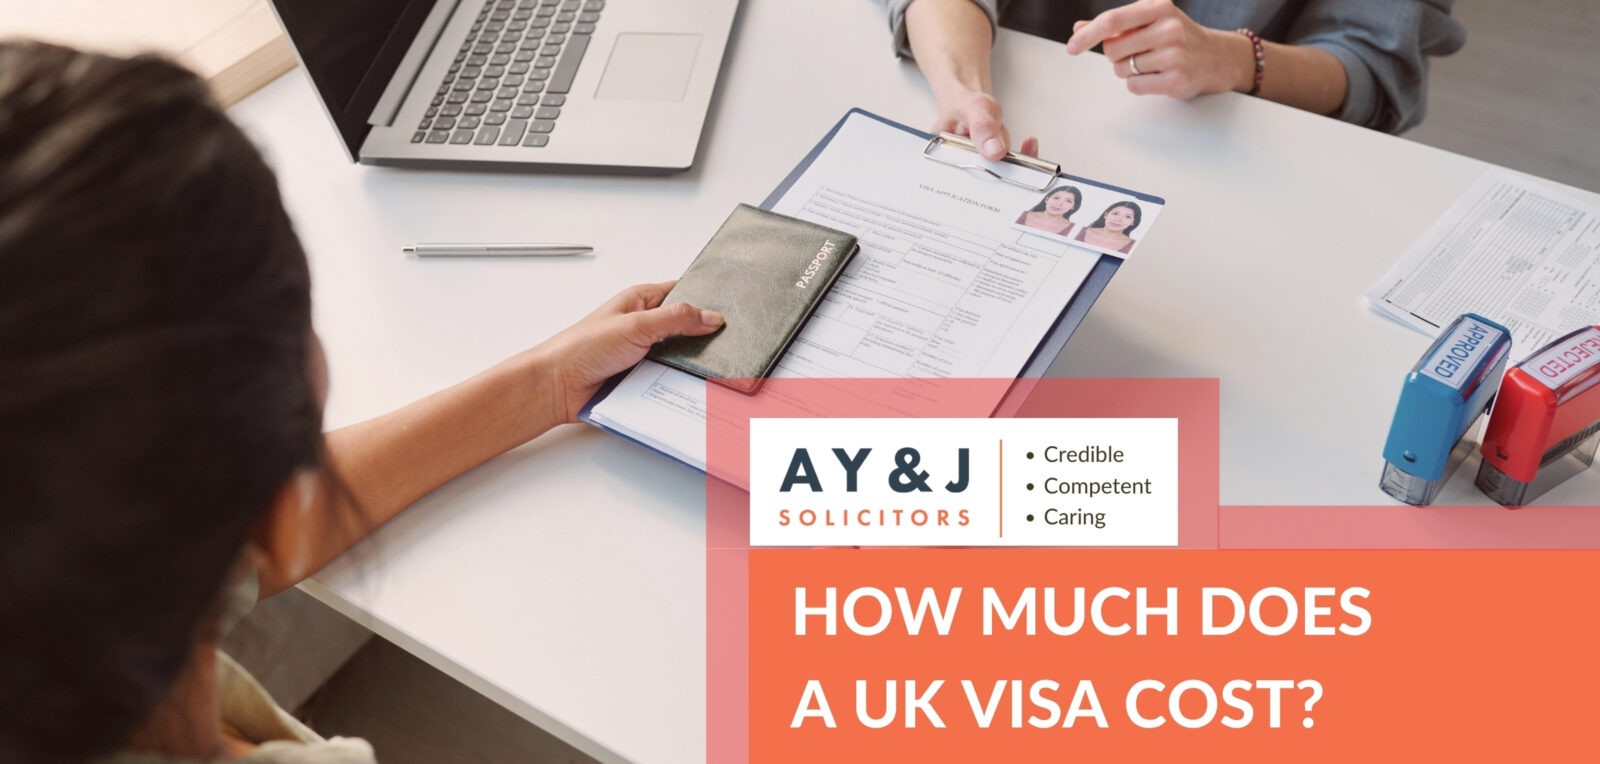 How much does a UK visa cost?